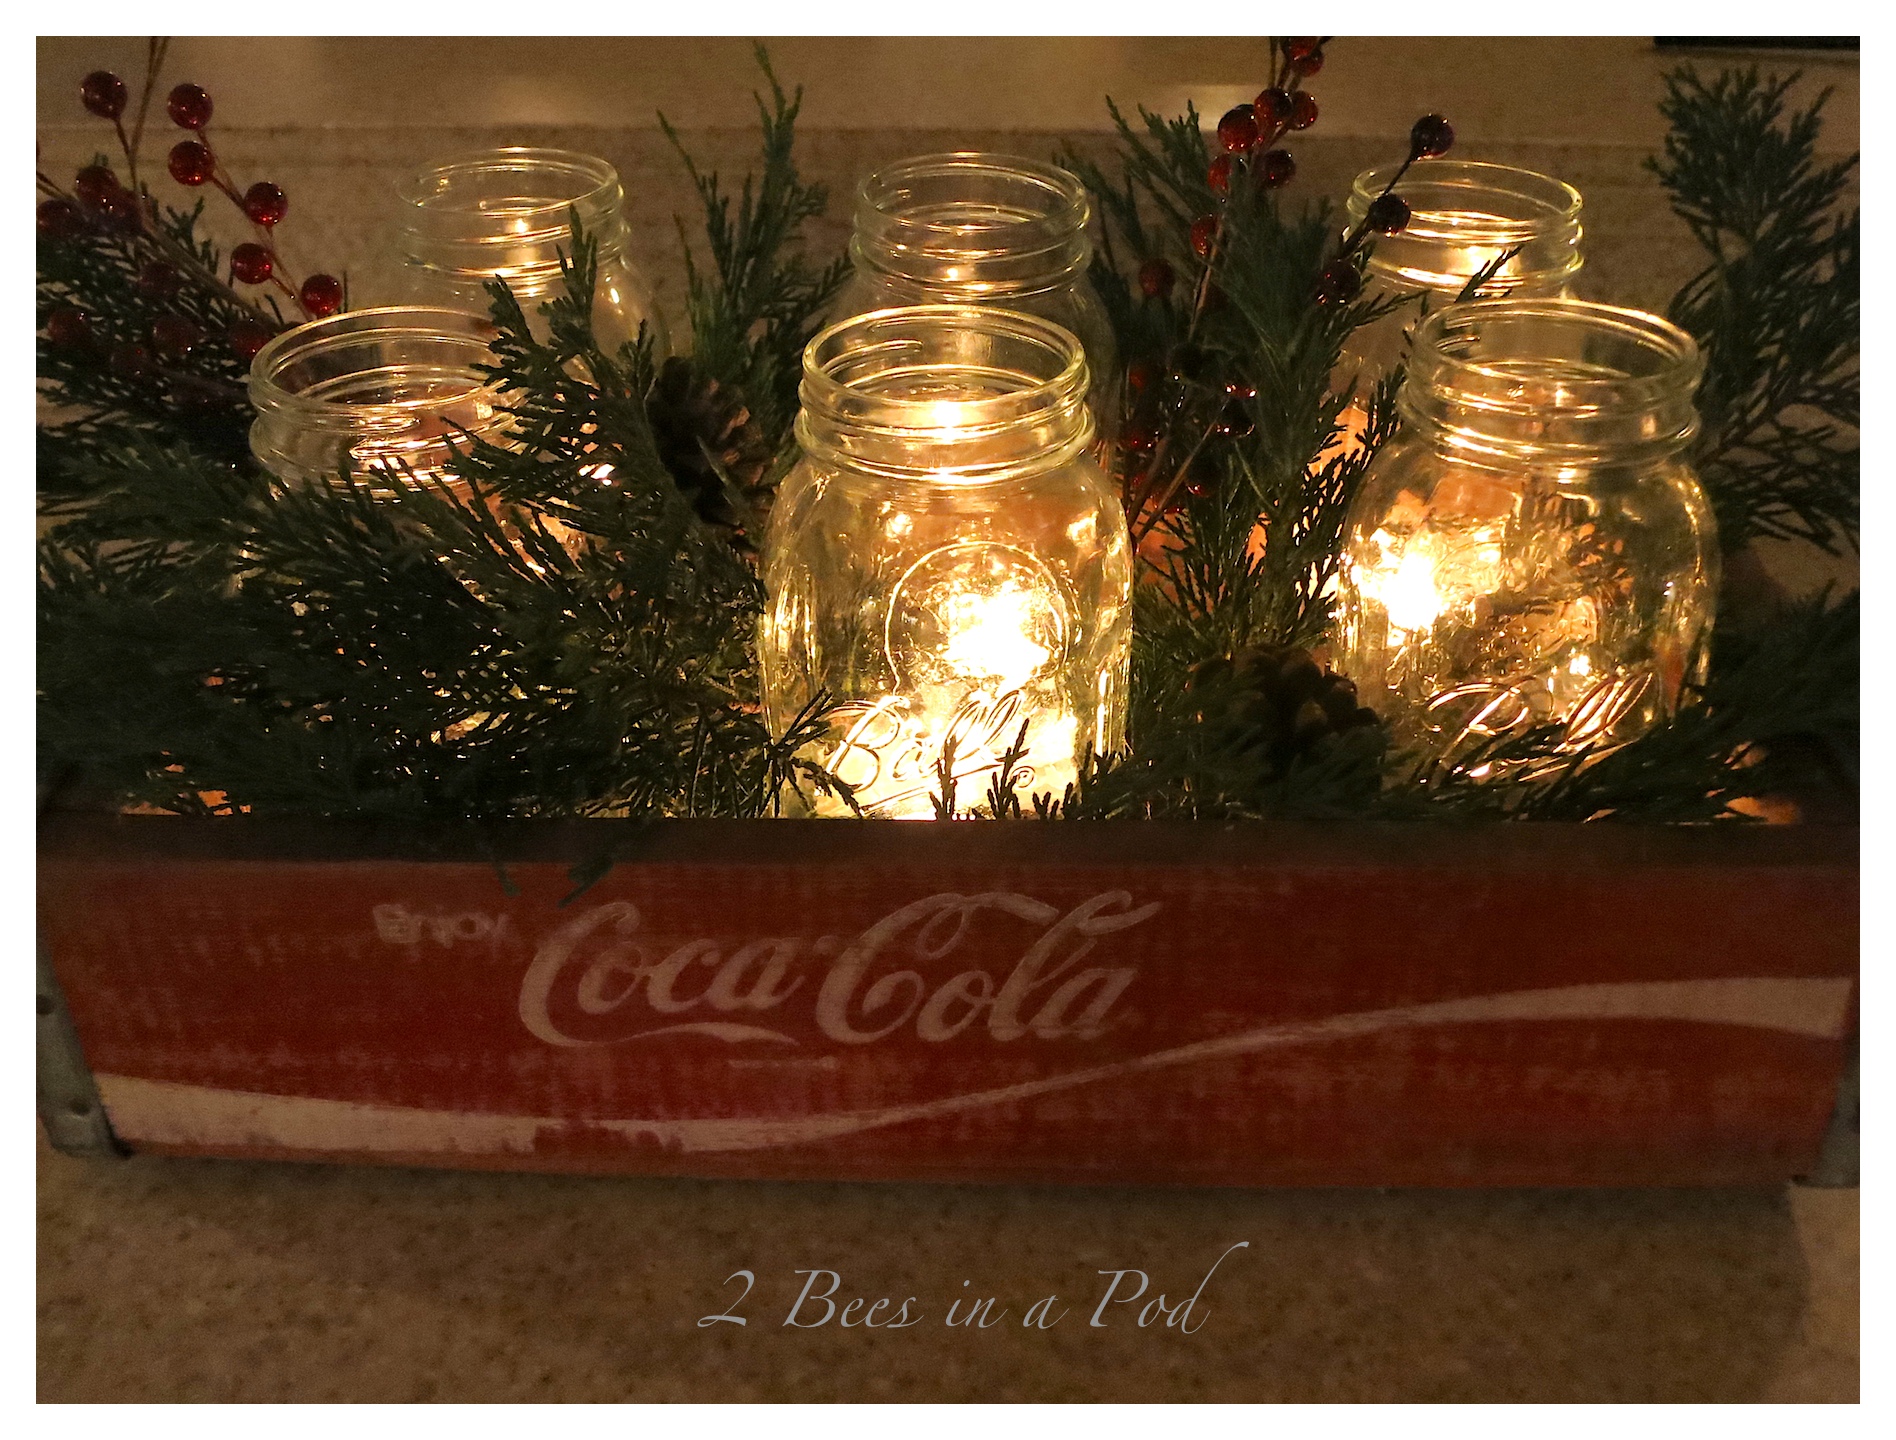 I used a vintage Coke crate as Christmas centerpiece by adding Mason jars, tea lights, evergreen, pinecones and berries